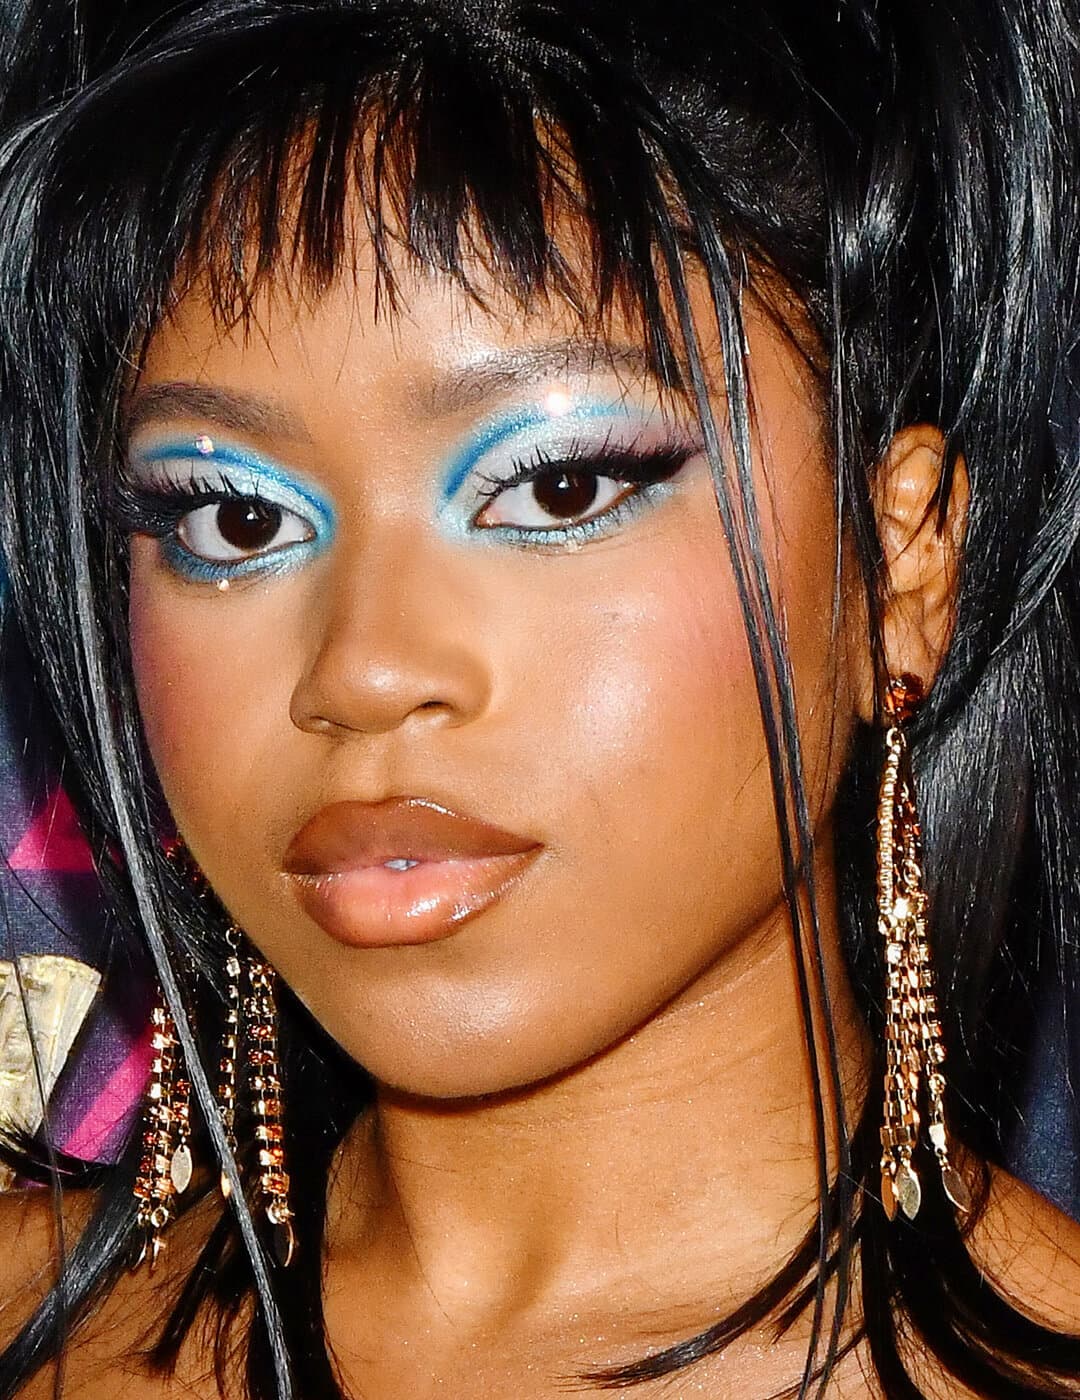 Riele Downs rocking a graphic blue eyeliner makeup look